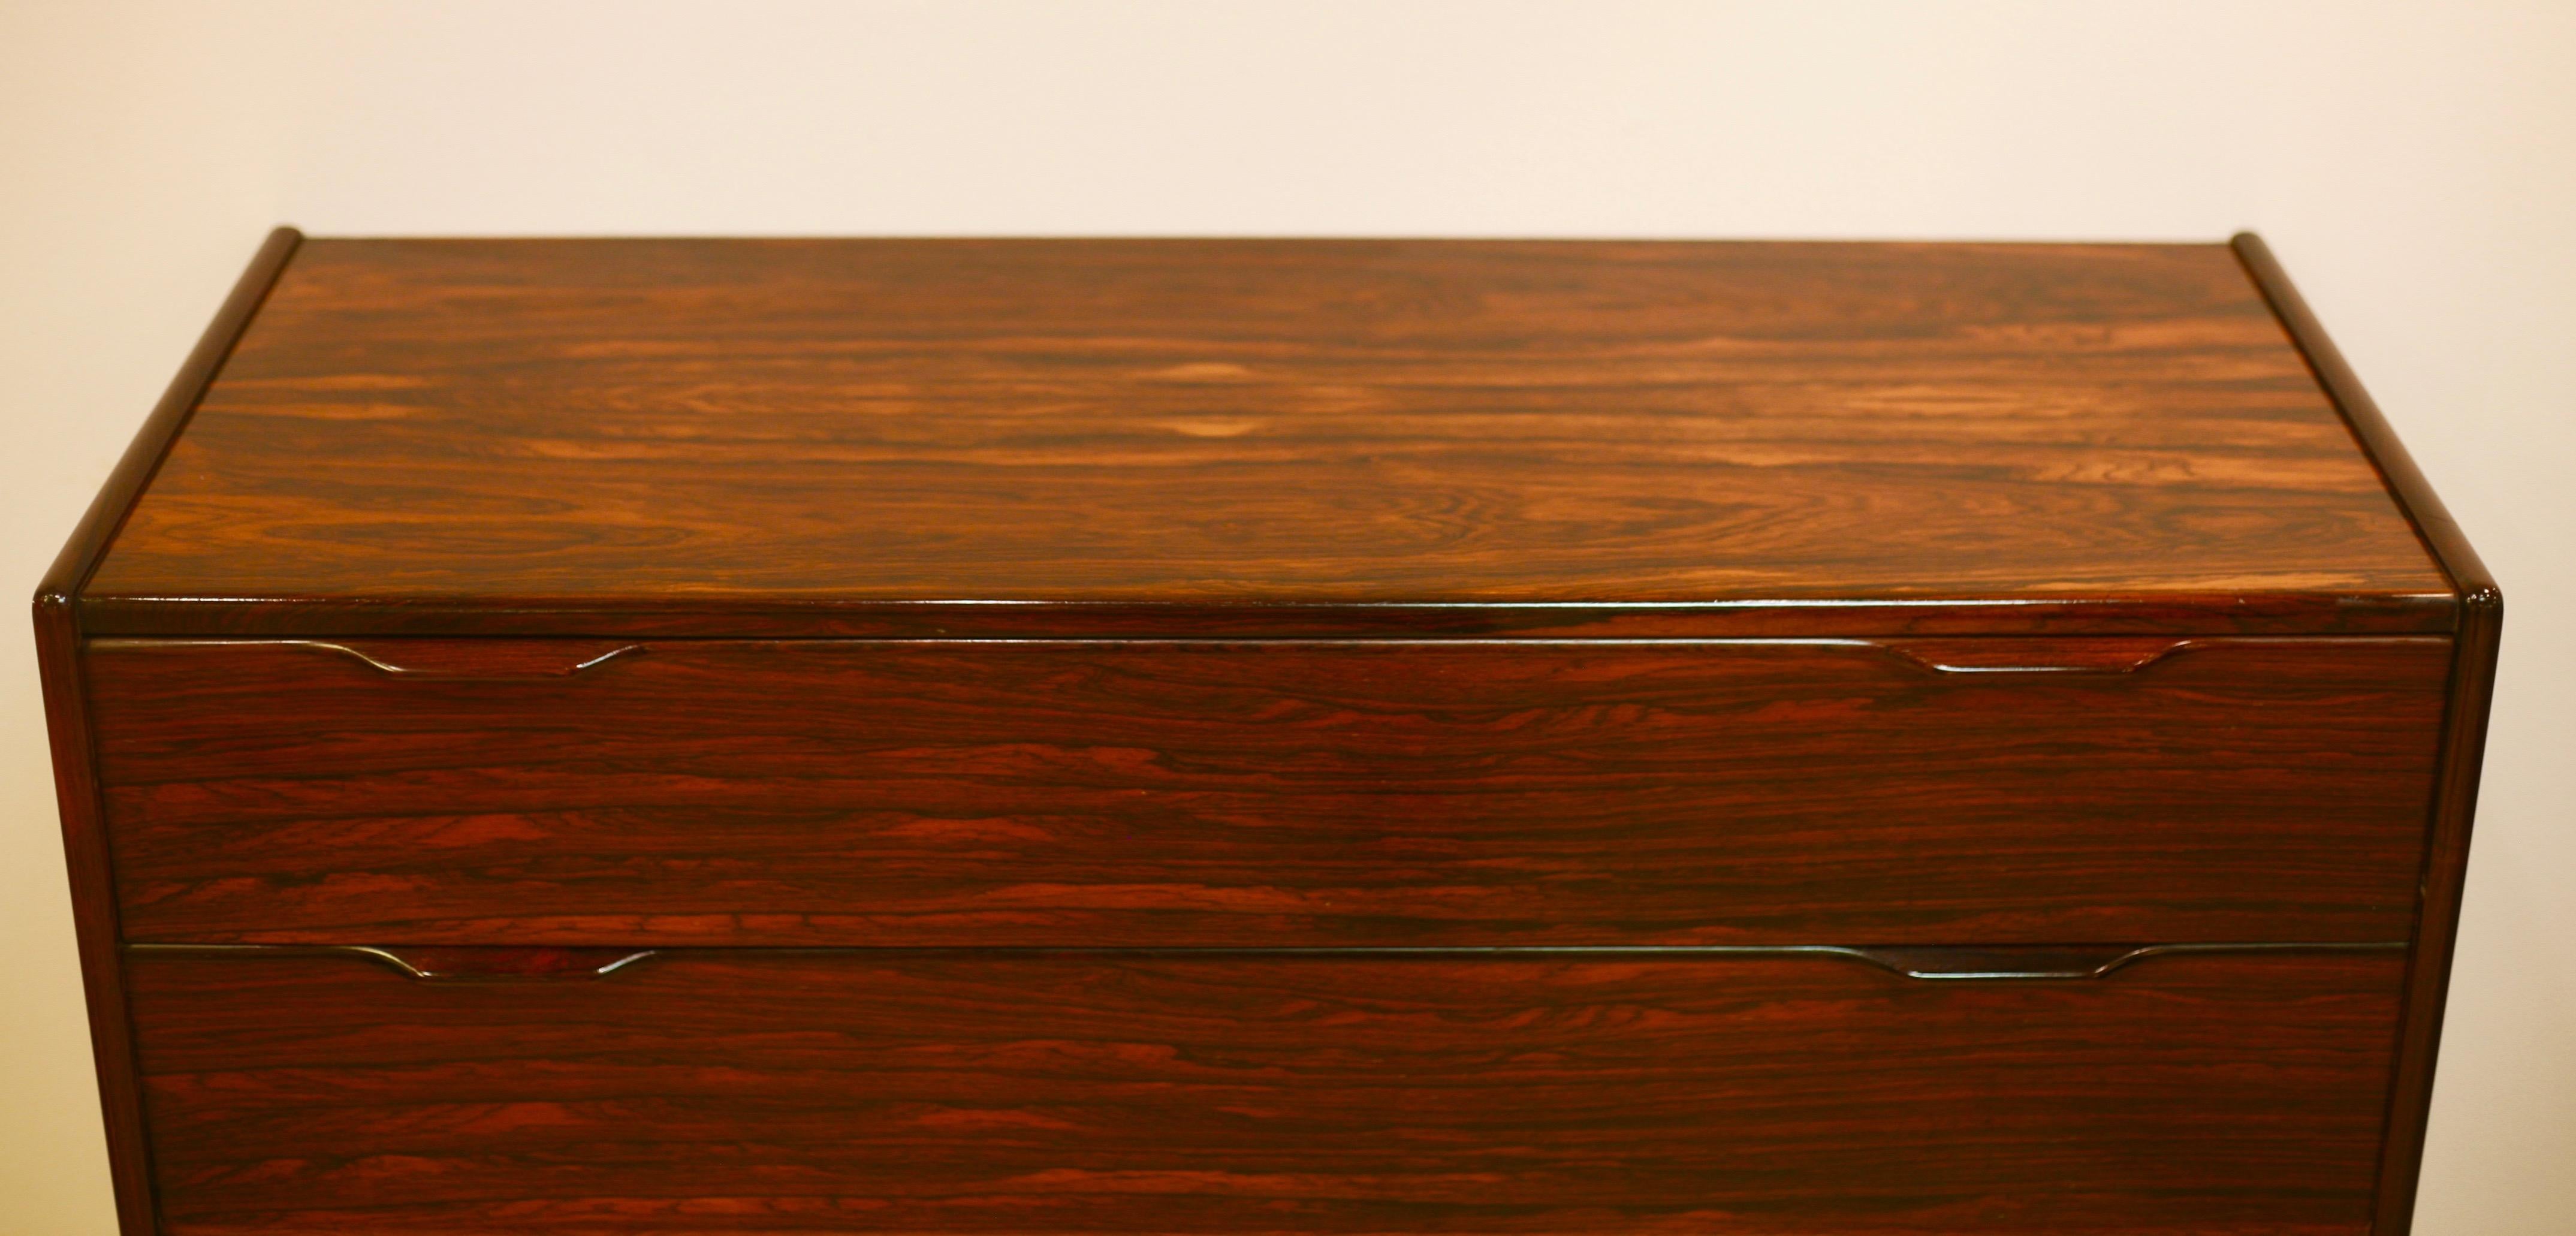 A lovely chest of drawers in dark rosewood/jacaranda. Excellent condition. Beautifully sculptured handles. Designed by In Kofod Larsen for Fredericia furniture in Denmark.